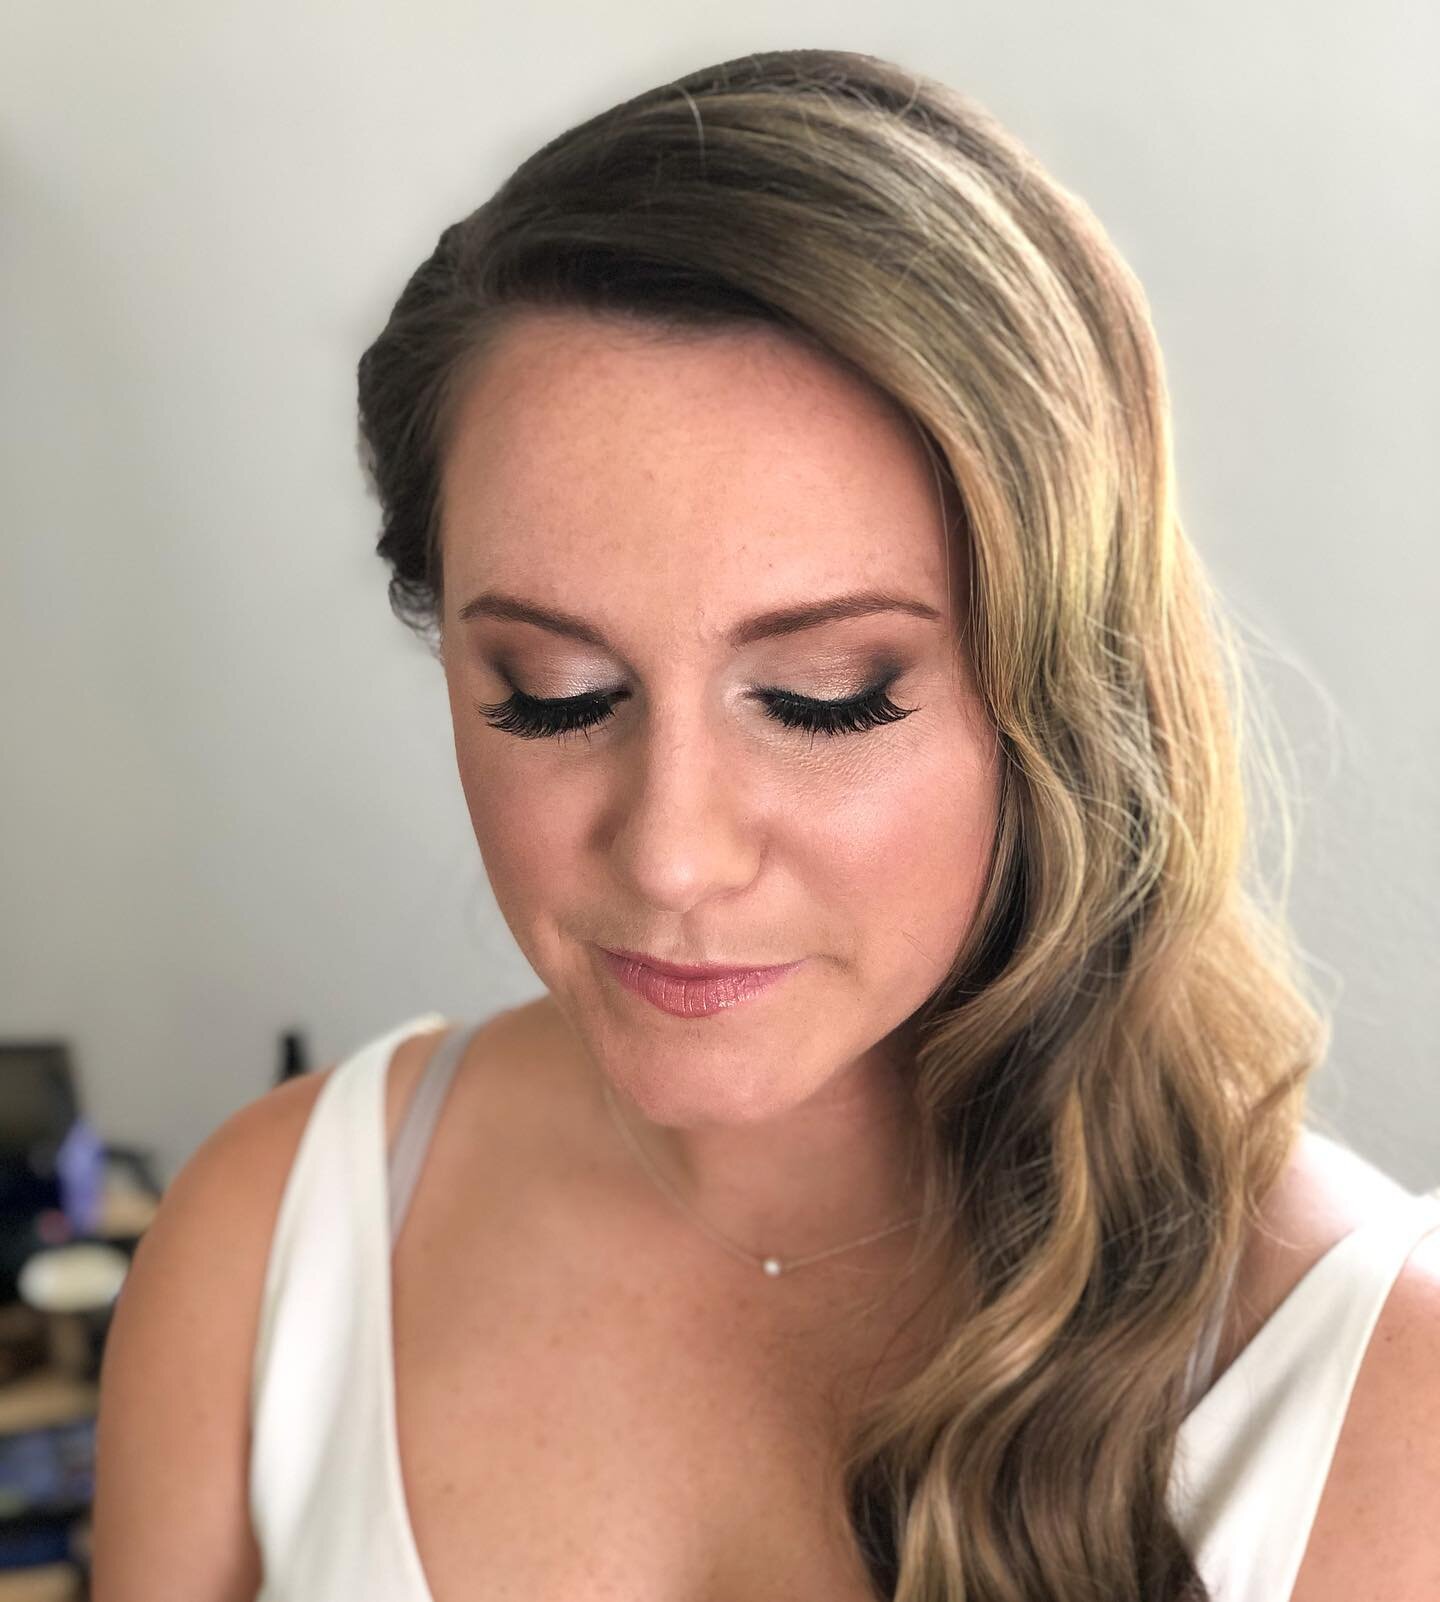 Bridal makeup tip: aim for a notch or two up from your everyday look so you&rsquo;ll look like yourself but more bridal👰🏼 I think we nailed it @sarahkatherine21 can&rsquo;t wait for the big day!! (Makeup by me💁🏻&zwj;♀️ hair by @misty_dawn29)